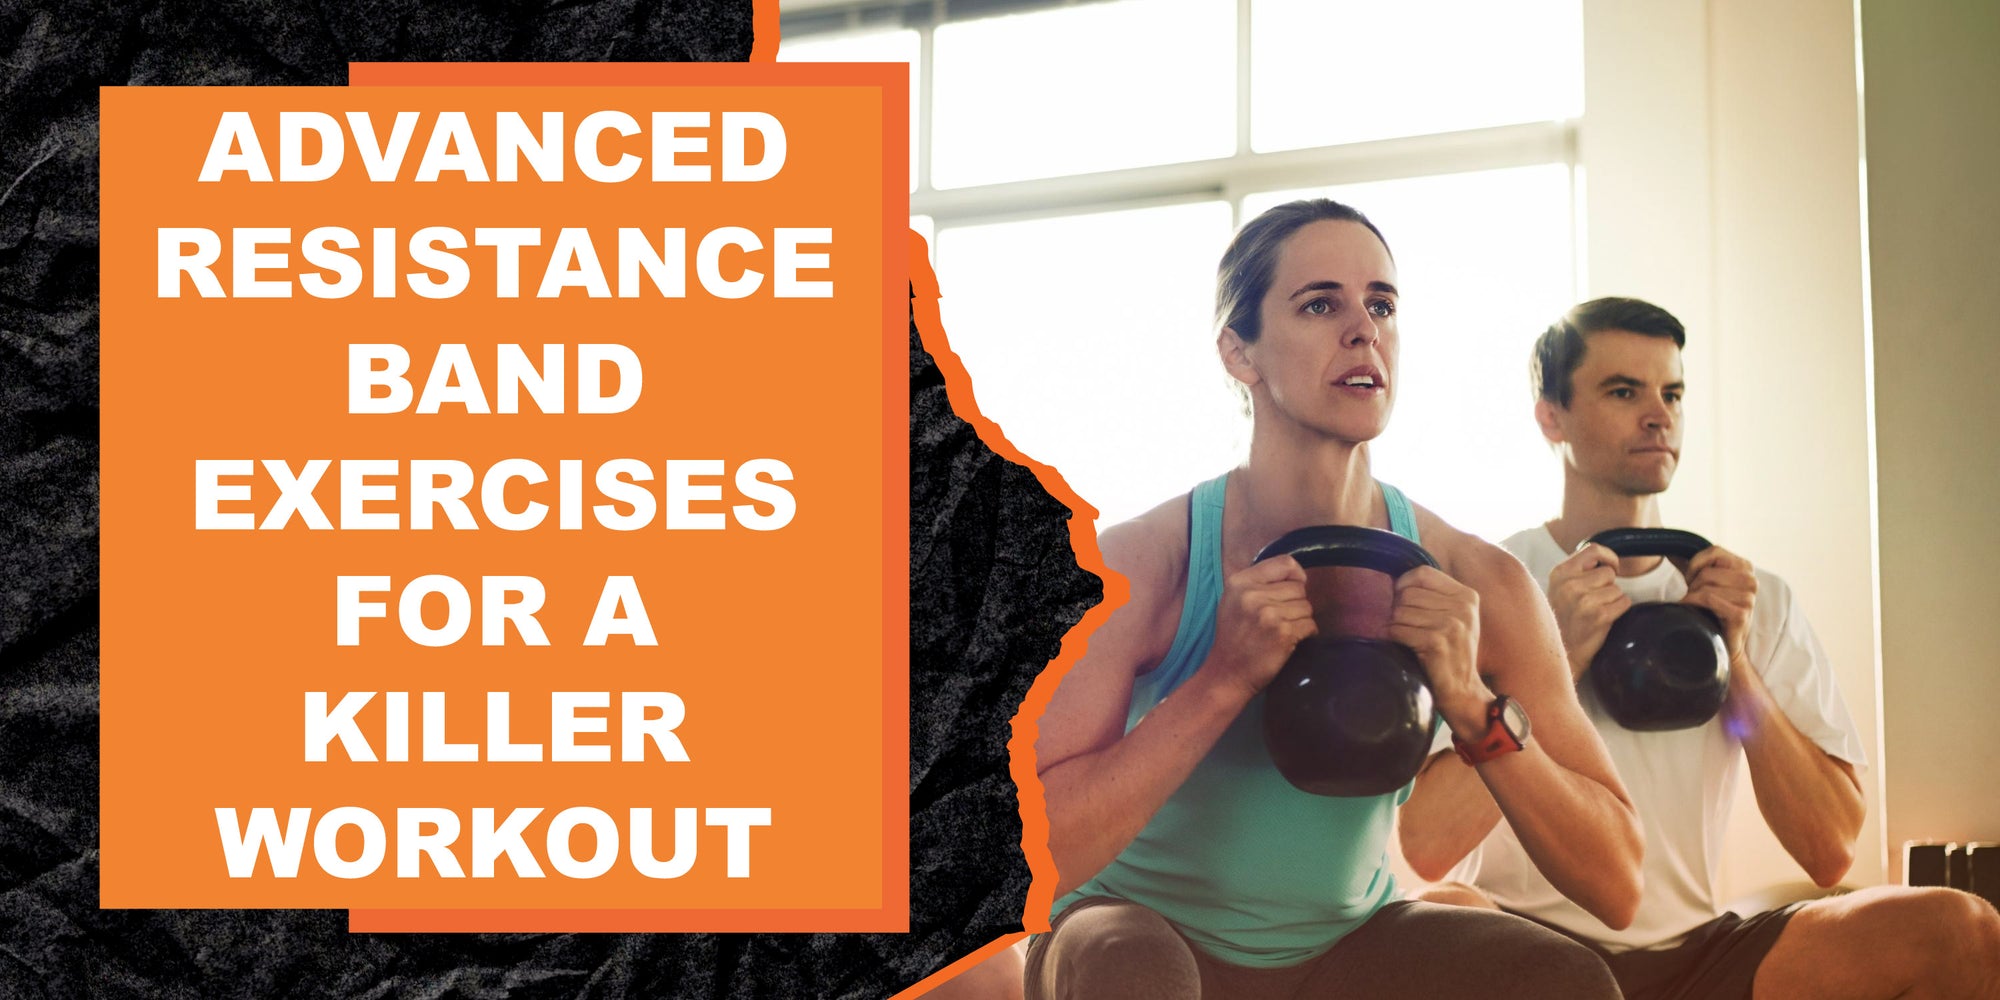 Advanced Resistance Band Exercises for a Killer Workout